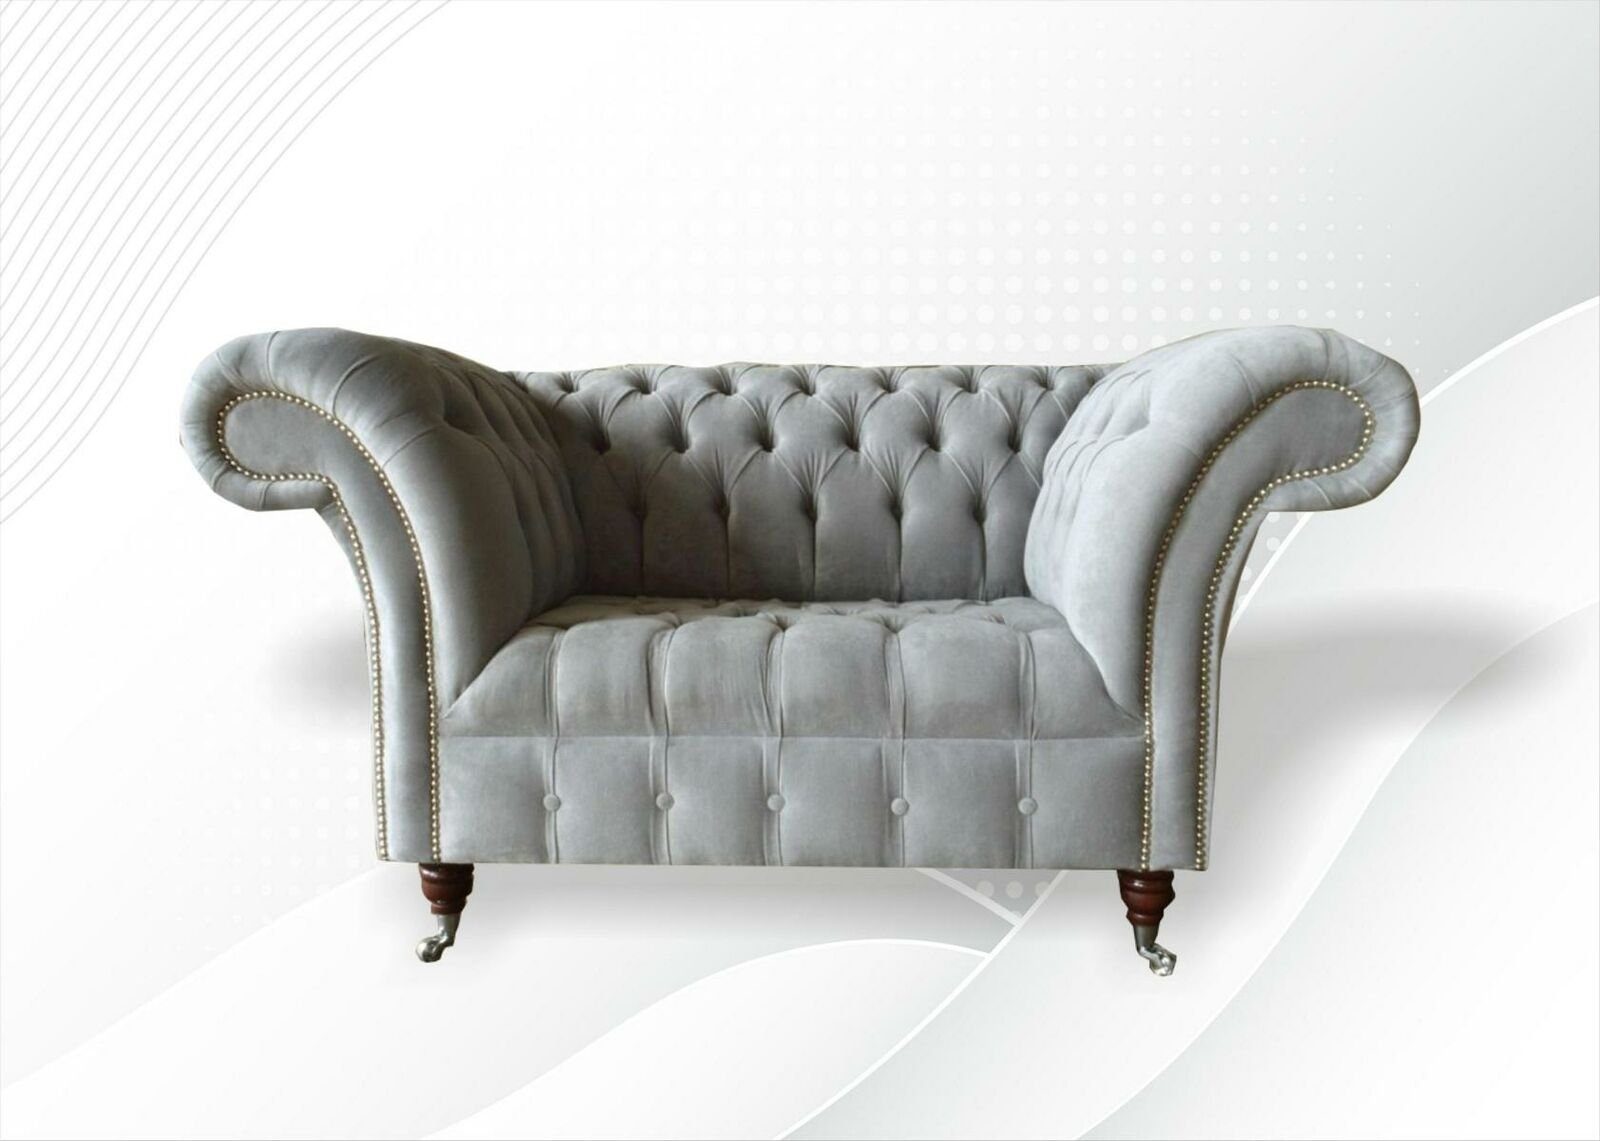 JVmoebel Chesterfield-Sessel, Sessel Couch Polster Sofa Textil Chesterfield Couchen 1,5 Sitzer Grau